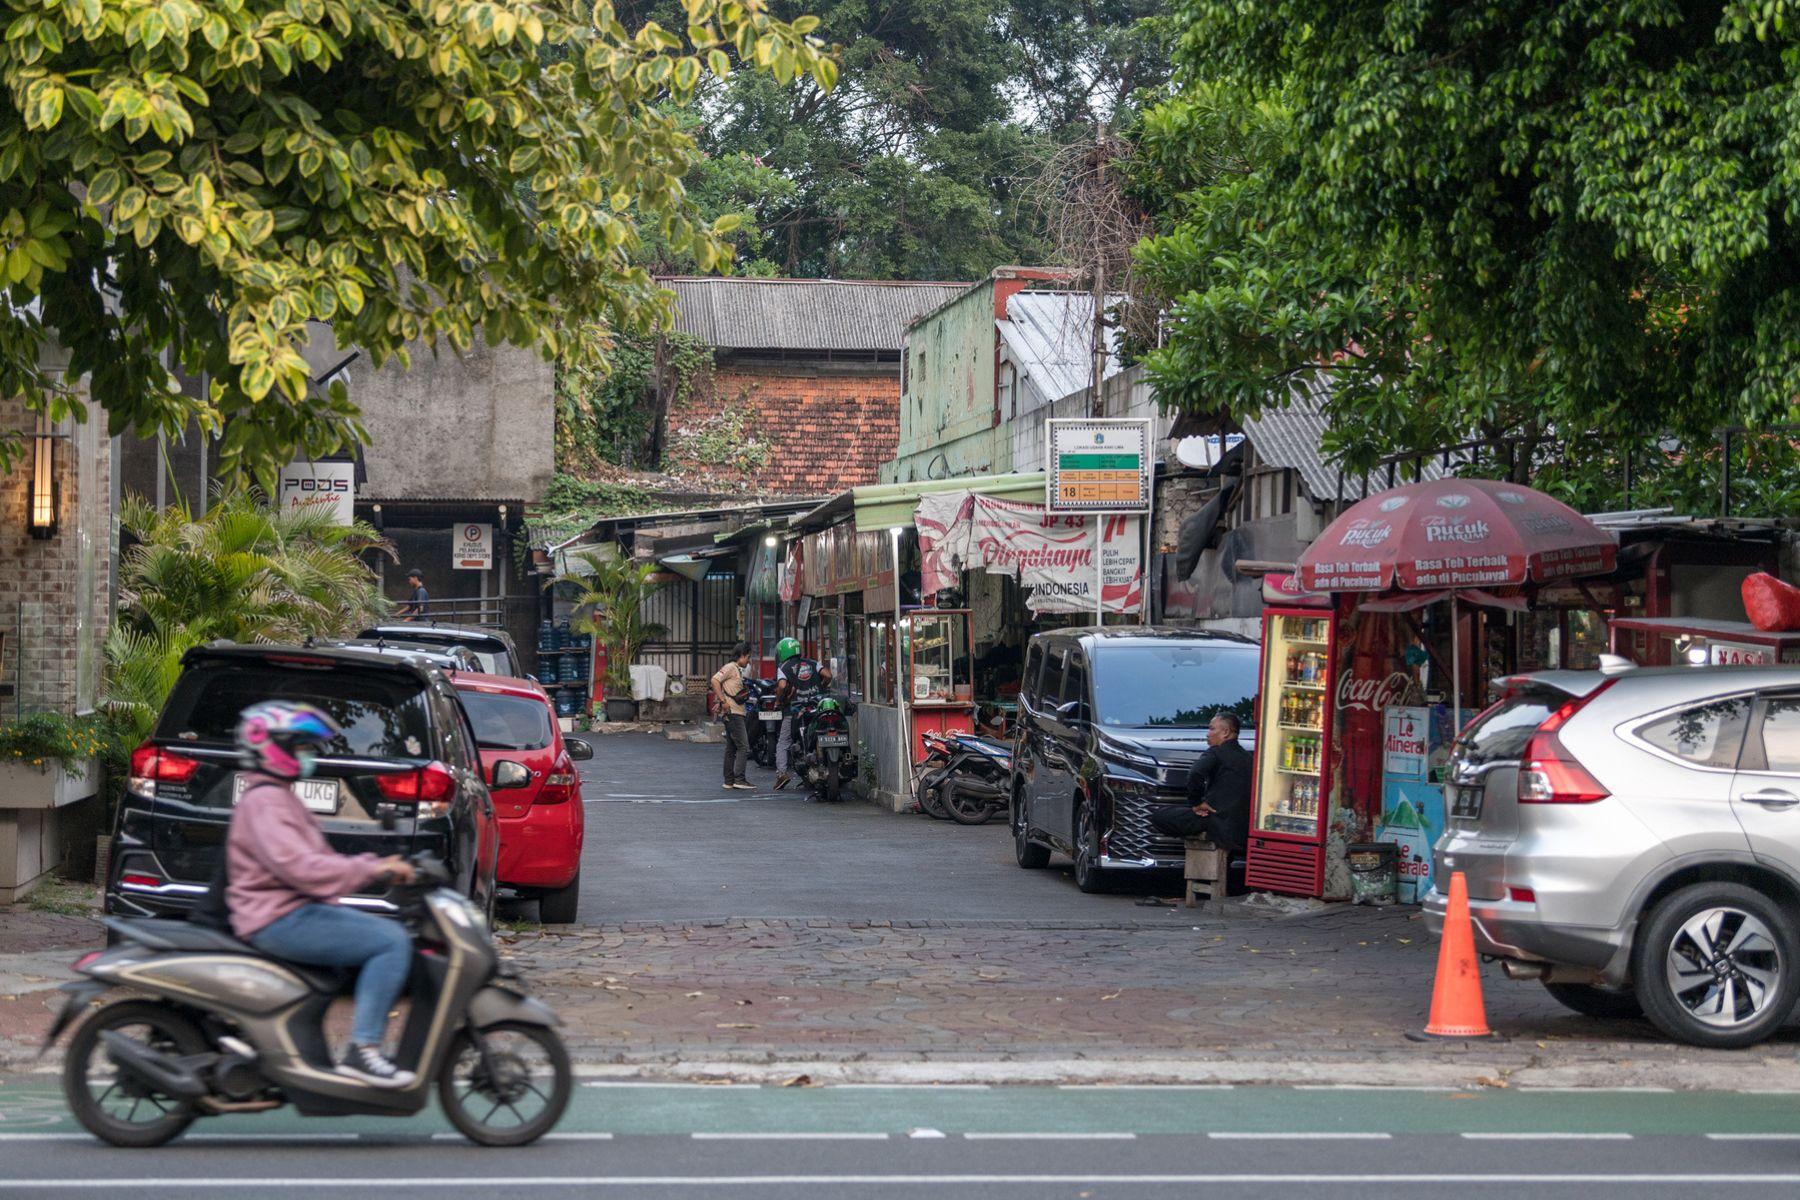 People go about their day on a street in the central district of Jakarta. Photo: LWF/Albin Hillert